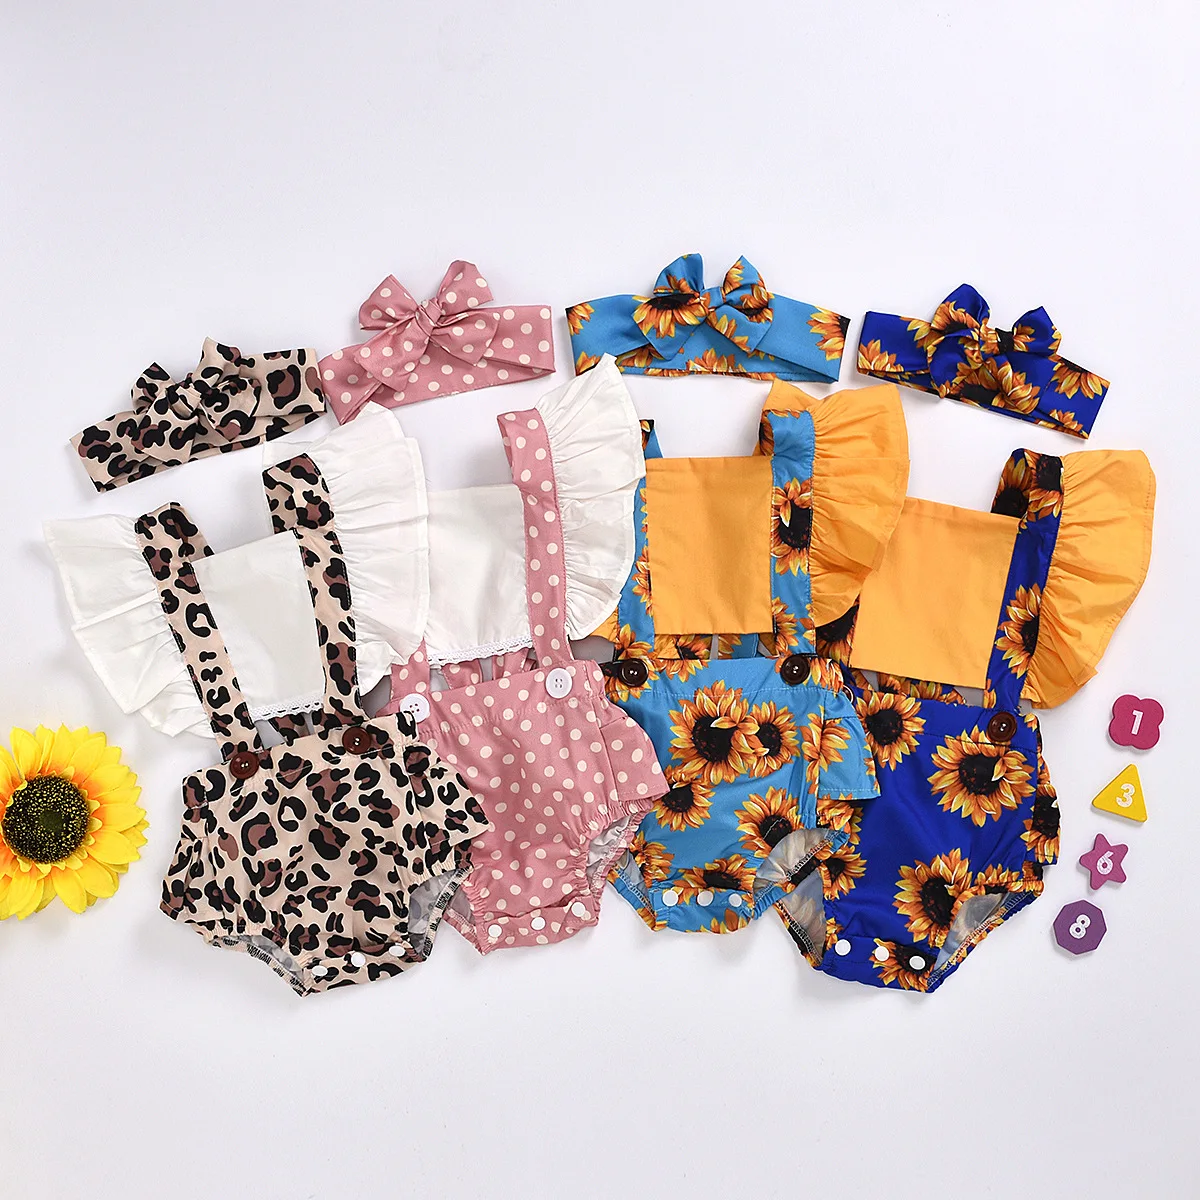 

805 Cute Floral Sleeveless Romper Baby Girls Clothes Jumpsuit Romper+Headband 0-24M Infant Toddler Newborn Clothing Outfits Set, As picture